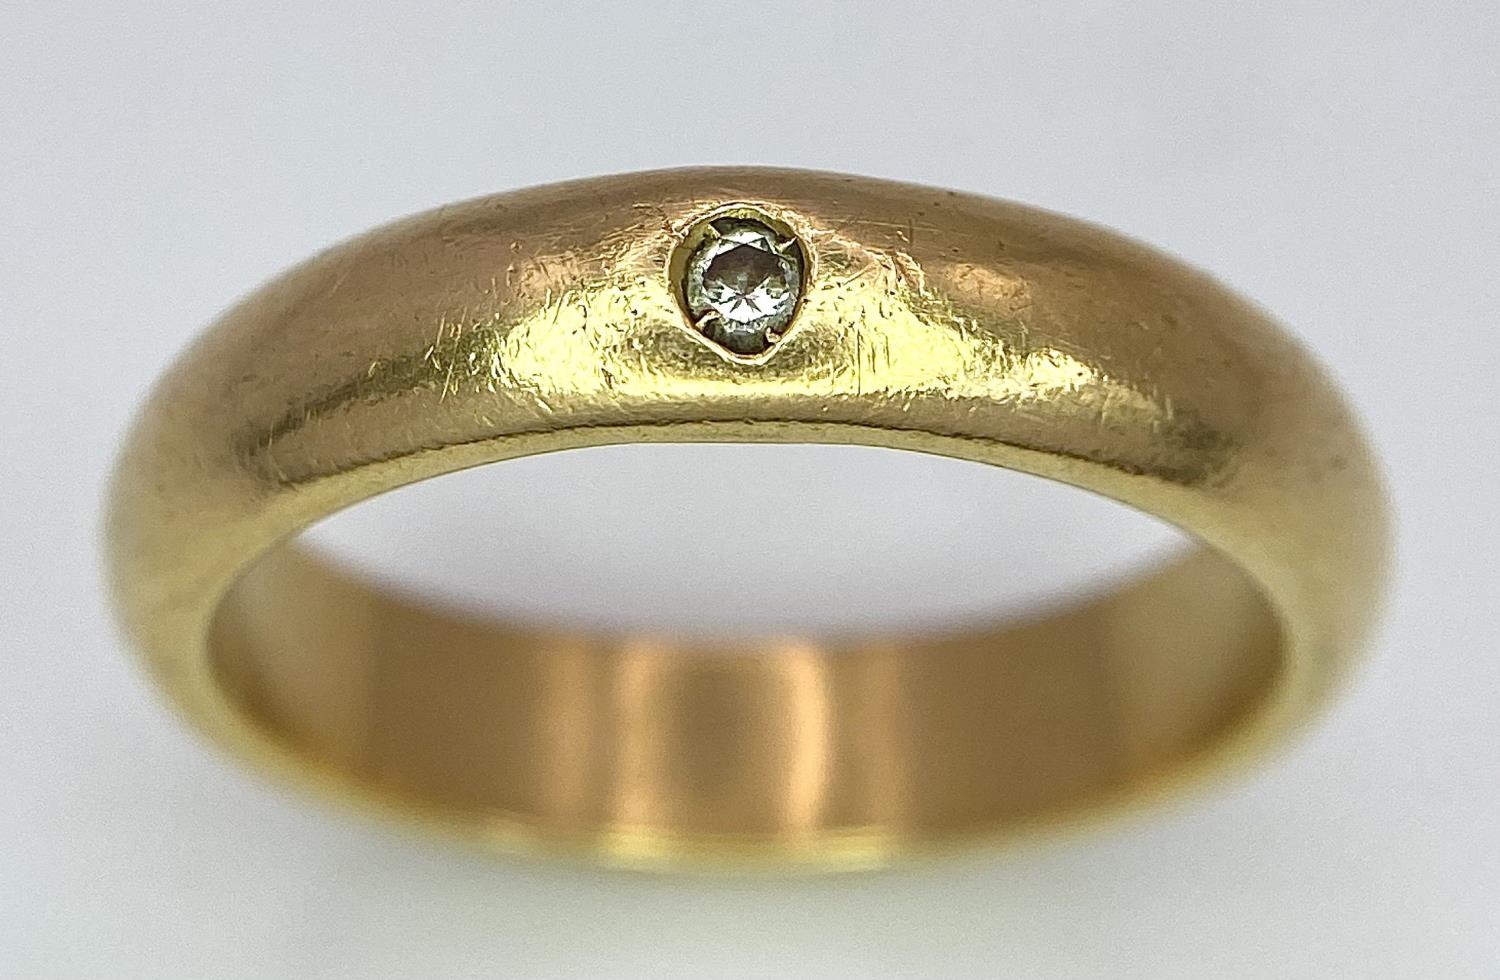 A 18ct Yellow Gold Diamond Wedding Band Ring, 0.02ct diamond, size Q, 7.5g total weight. ref: 1522I - Image 3 of 8